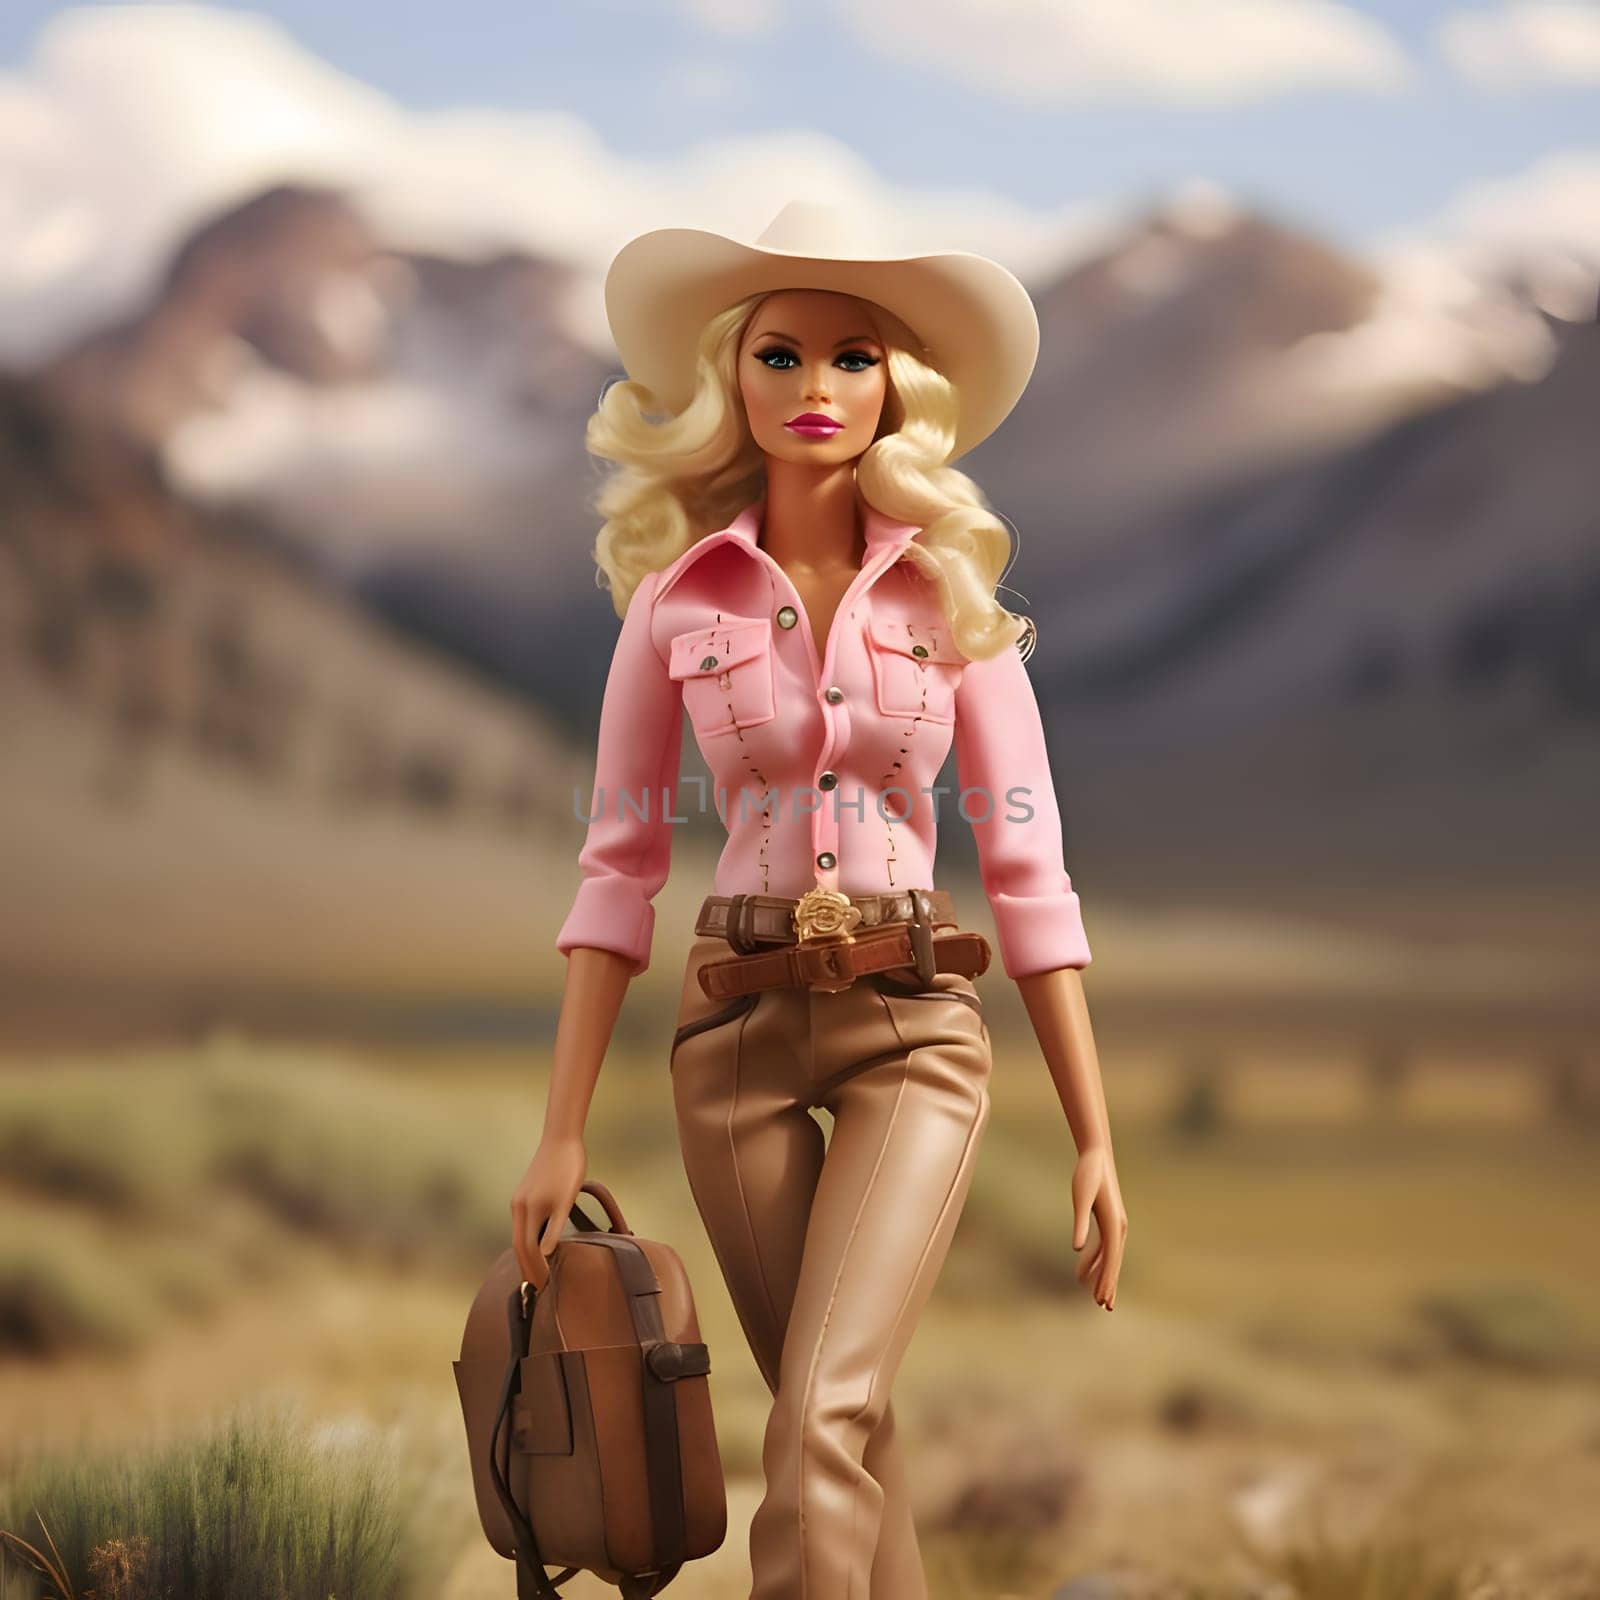 In this front view, a cute blonde Barbie doll is elegantly posed with suitcases against a beautiful natural landscape background.